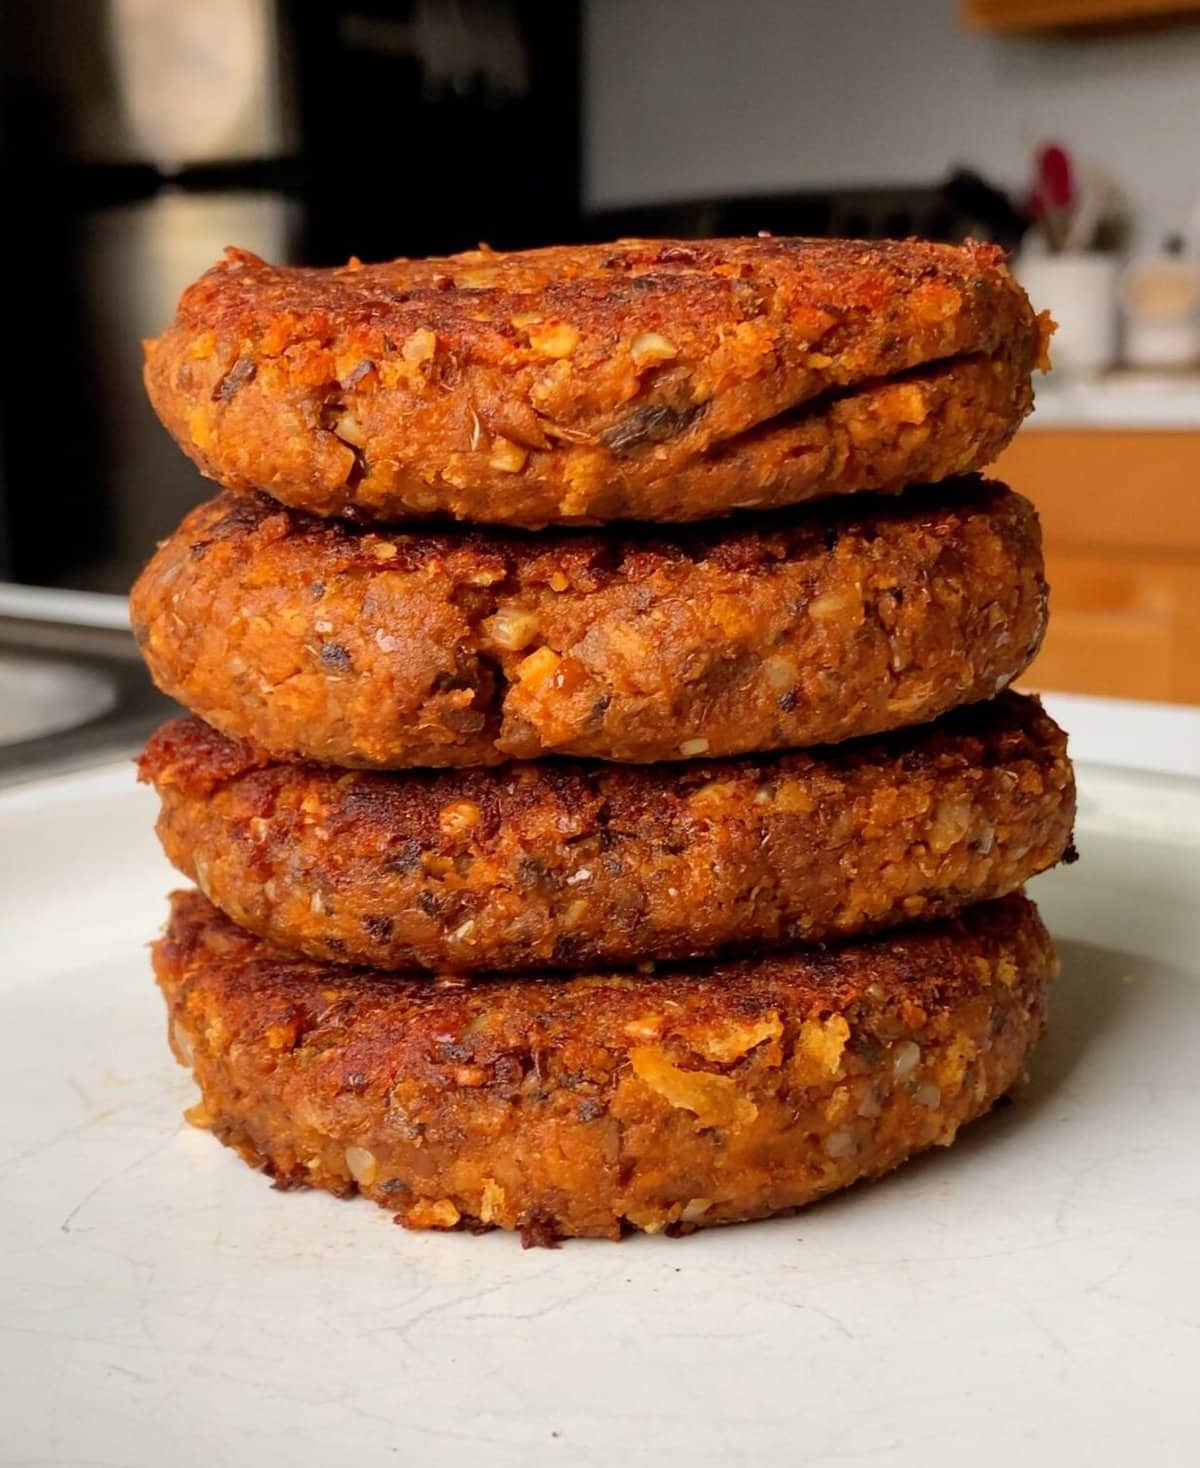 a stack of four lentil burgers